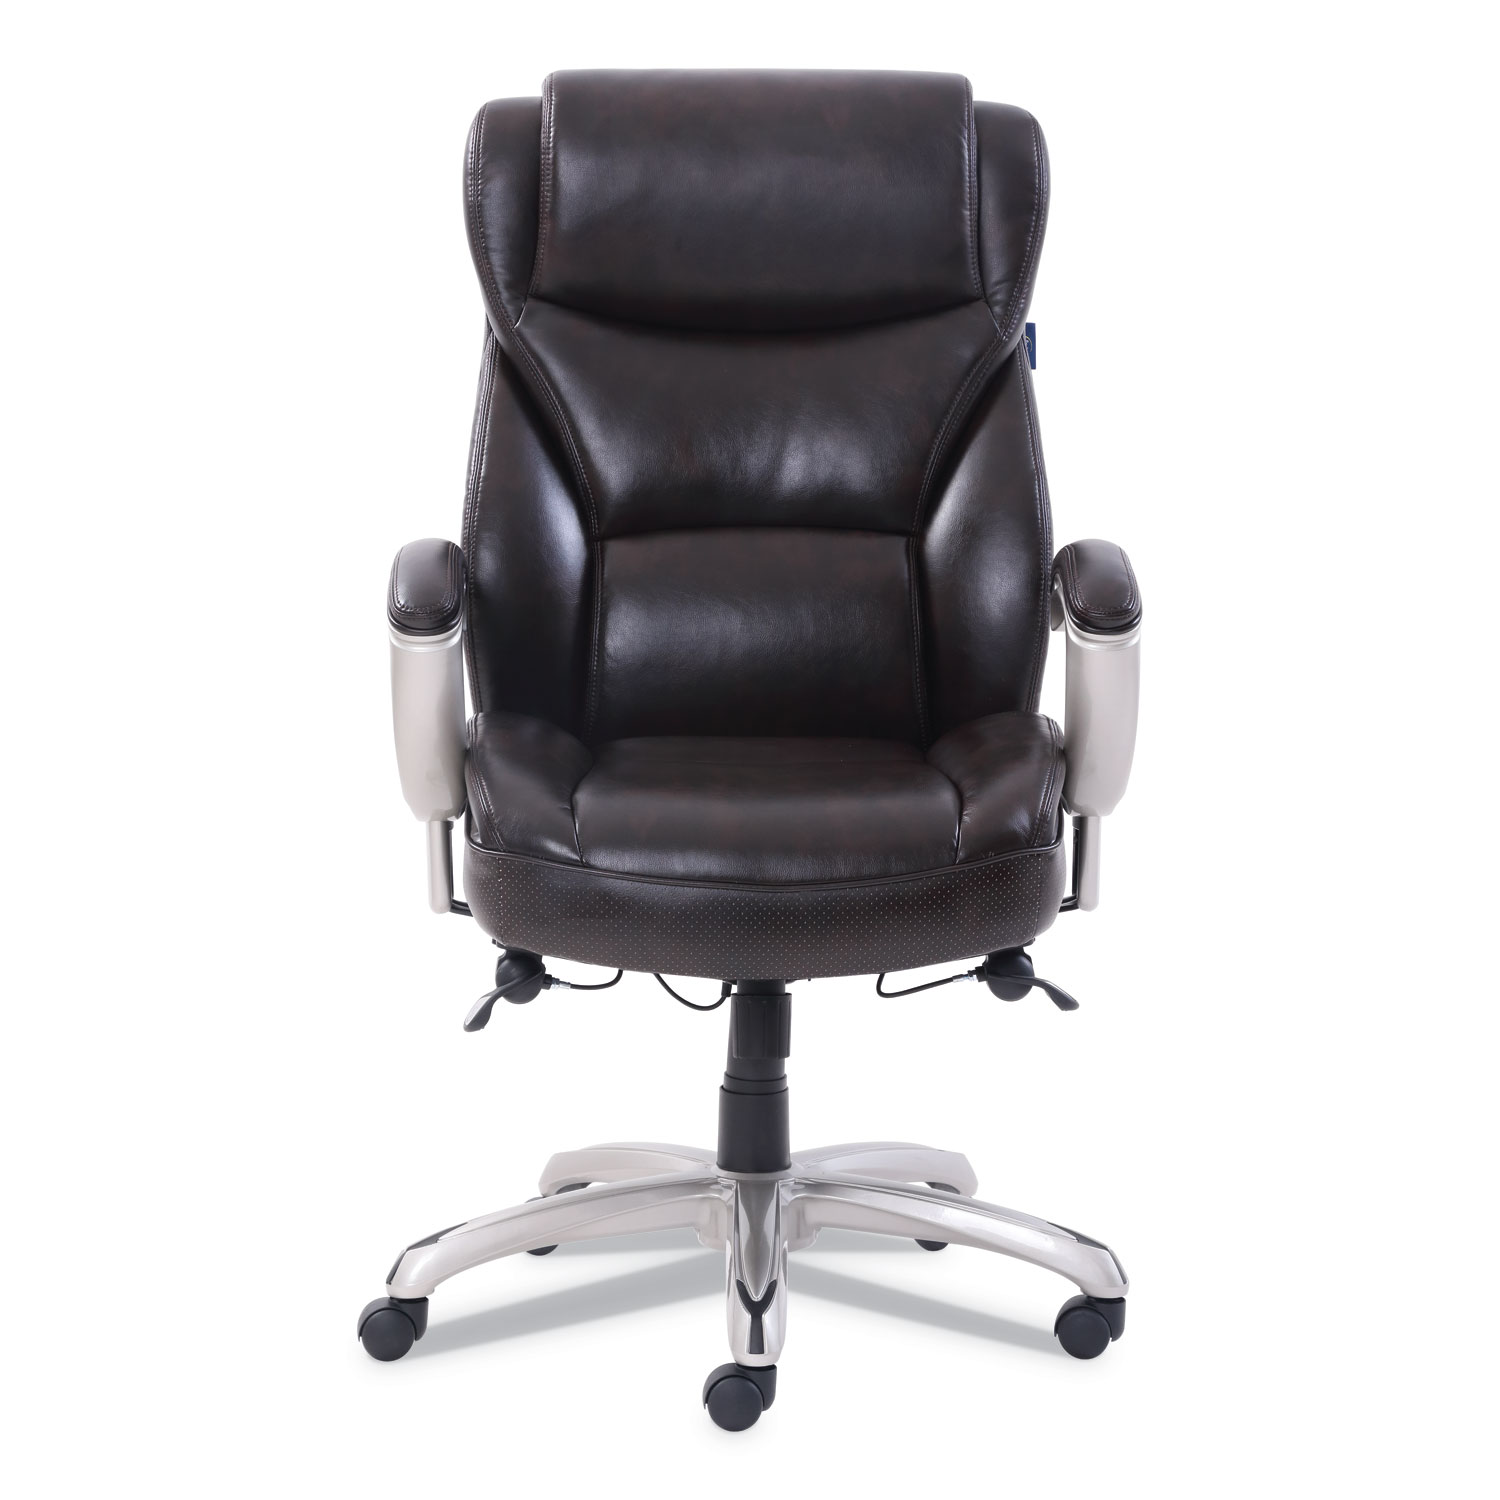 Emerson Big and Tall Task Chair, Supports up to 400 lbs., Brown Seat/Brown Back, Silver Base